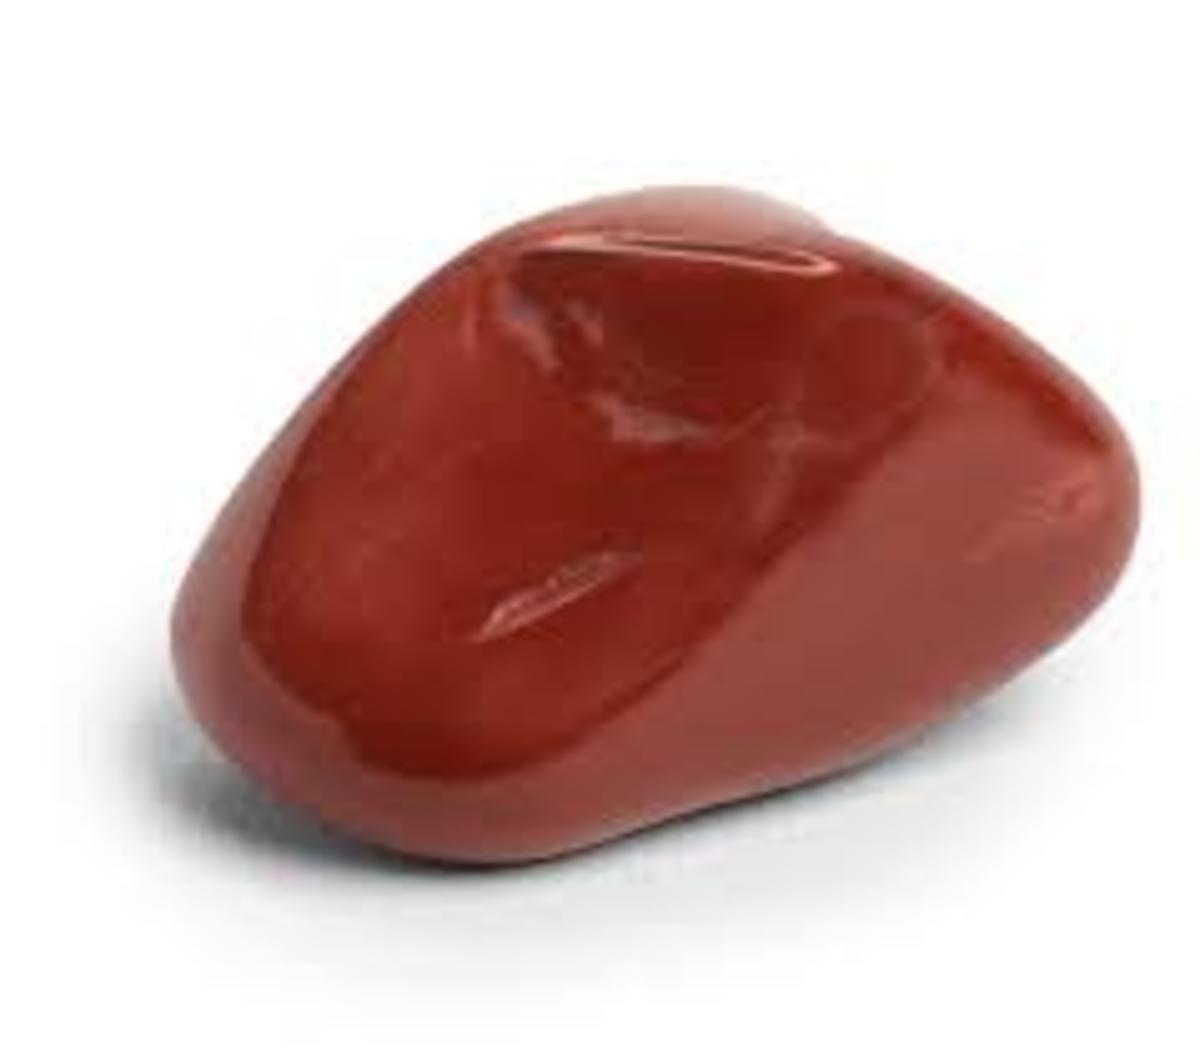 Red Jasper is a useful stone, especially for conflicts and problem solving. It is a great stone to meditate with.